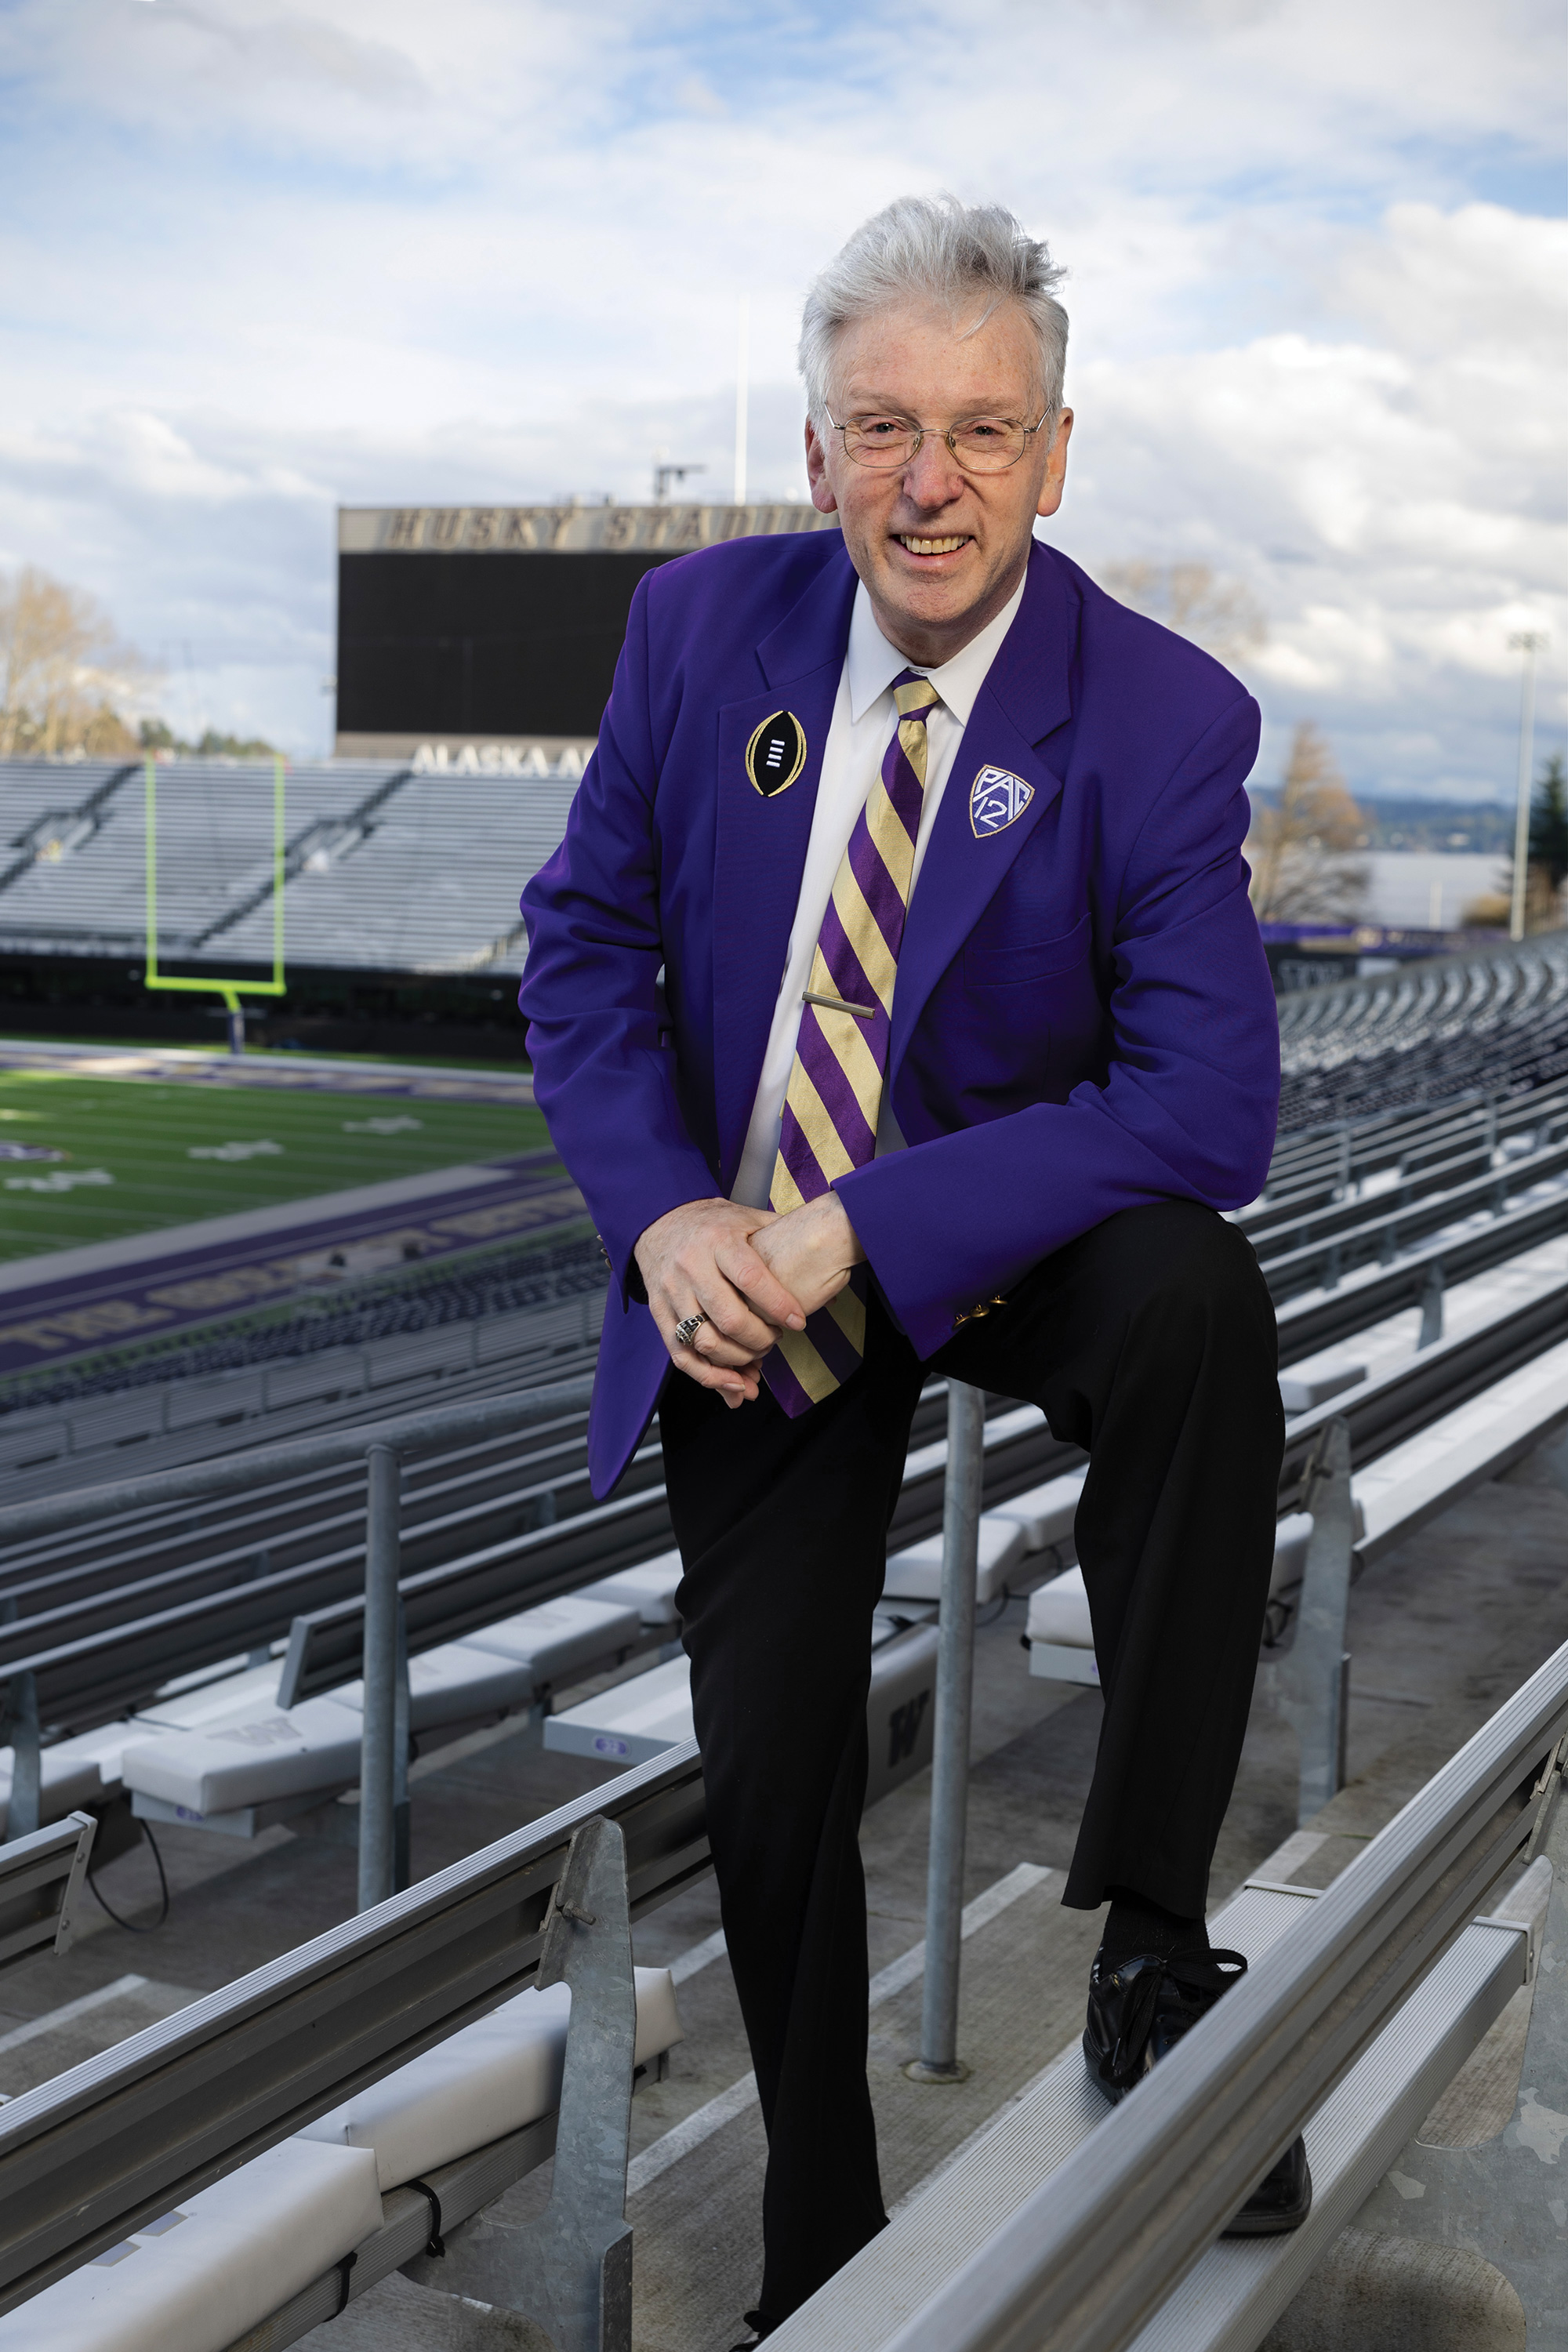 An older man wearing a purple suit and a striped tie smiles in Husky Stadium